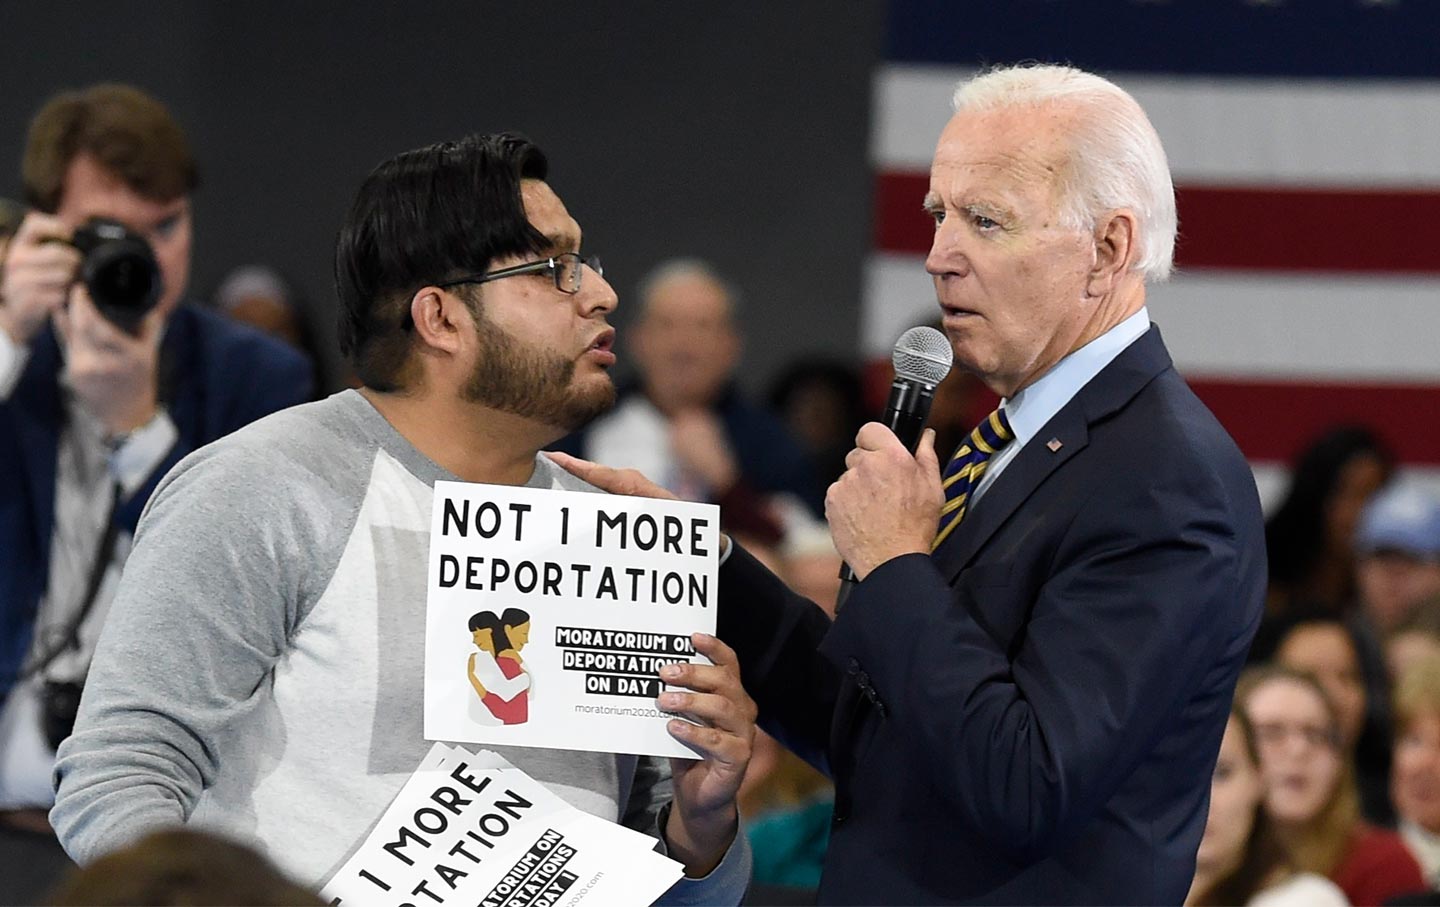 I Asked Biden About Obama-Era Deportations. He Told Me to Vote for Trump.